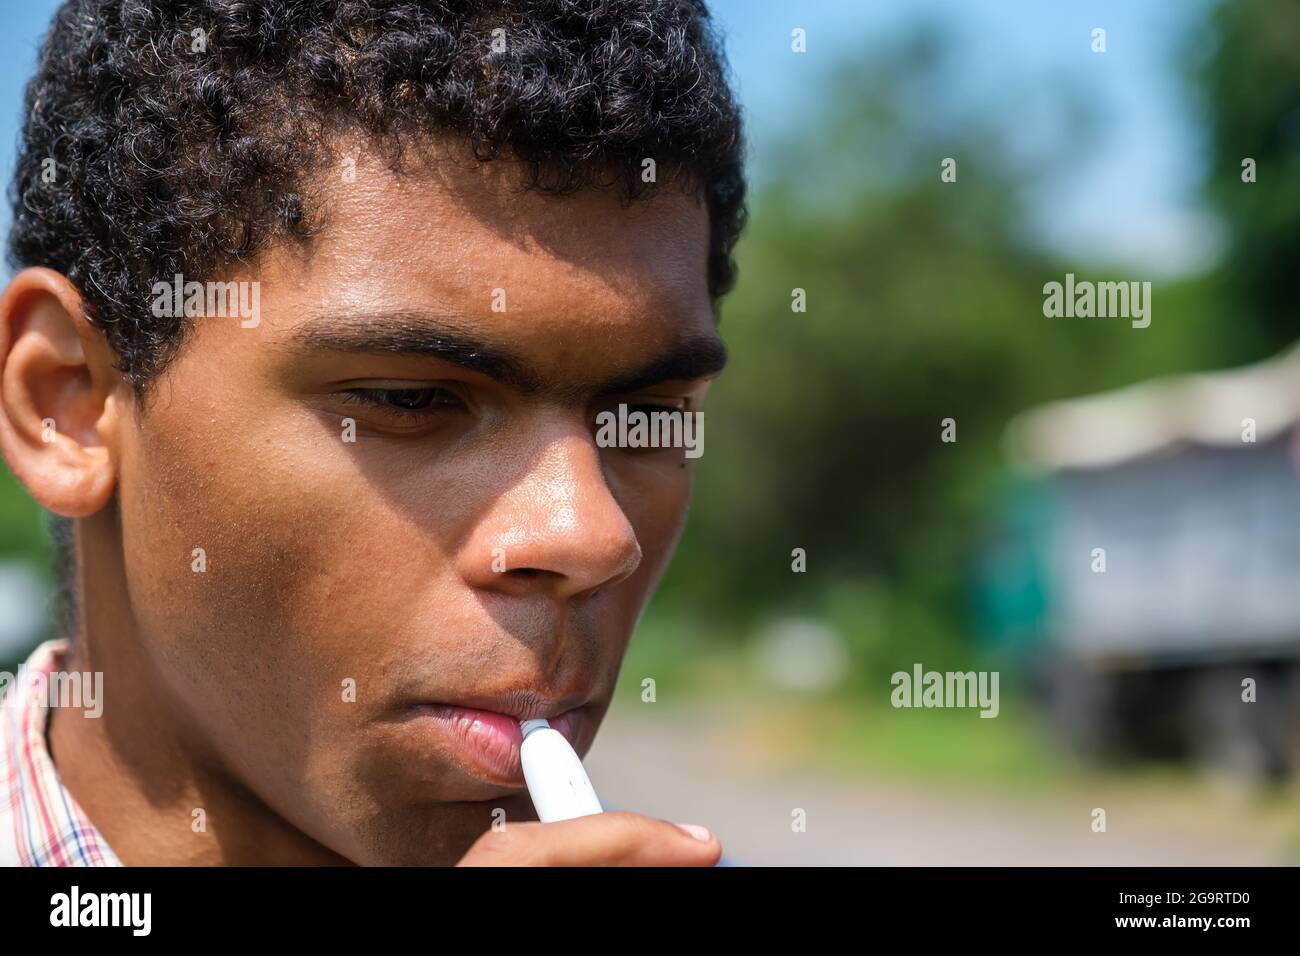 African American man smoking electronic cigarette with e-liquid outdoors Stock Photo